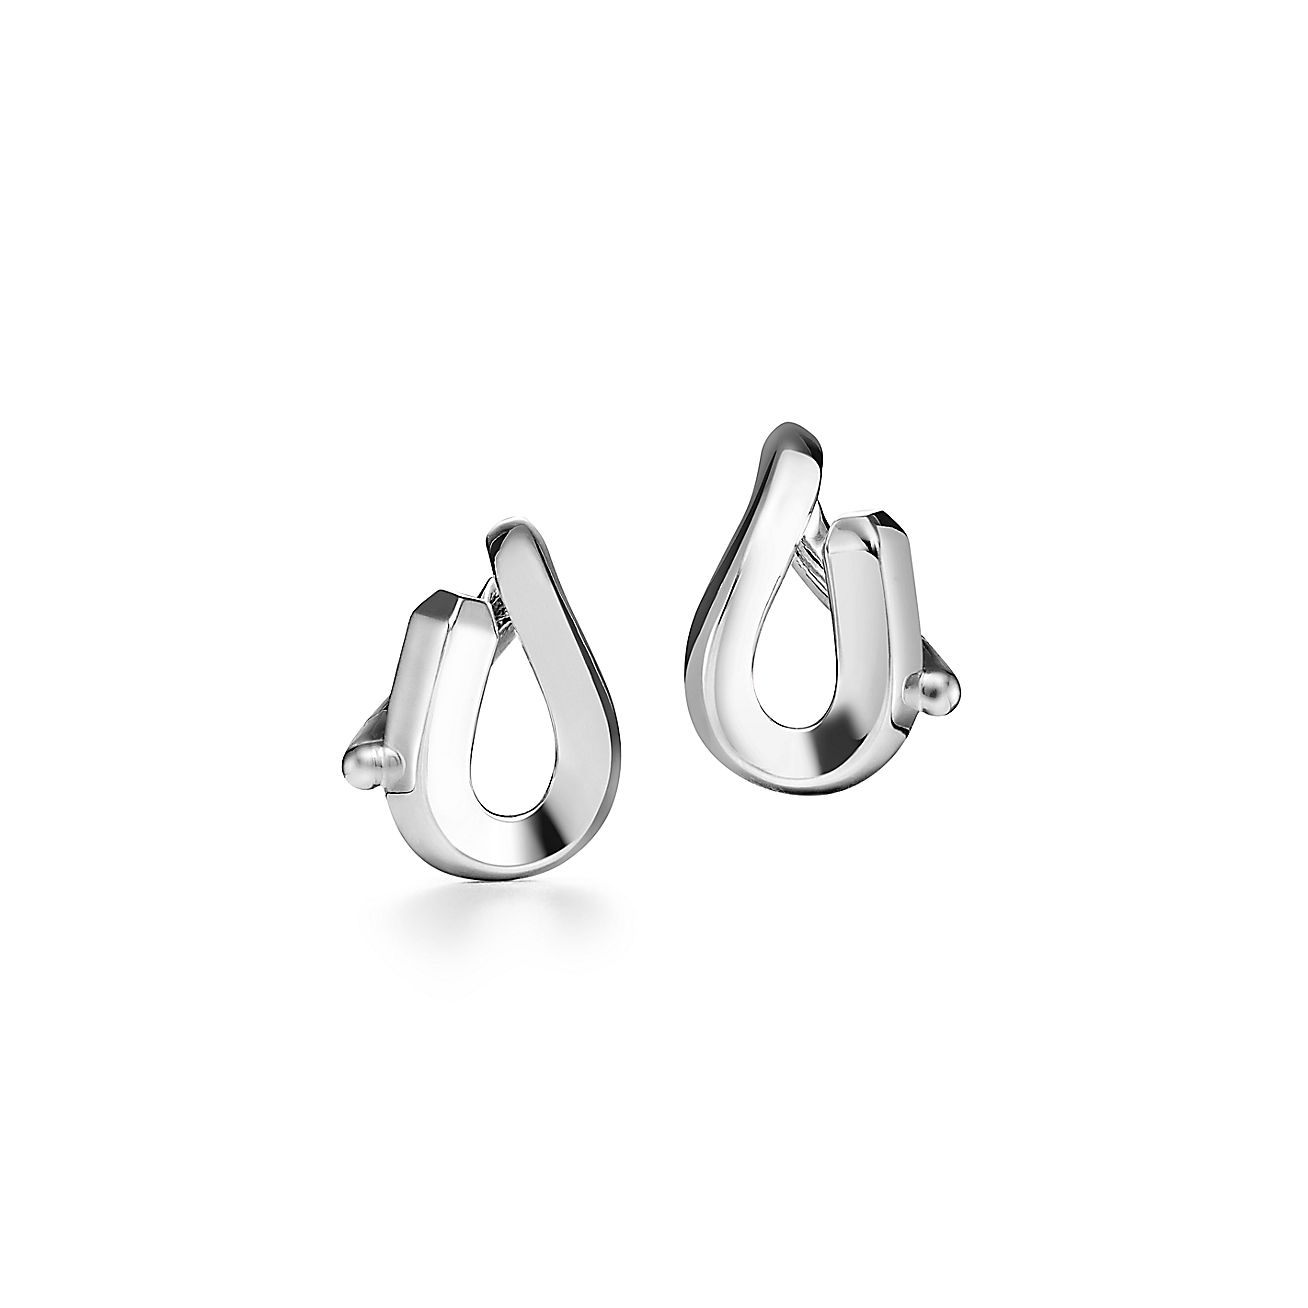 Tiffany Forge Single-link Earrings in High- polished Sterling Silver |  Tiffany &